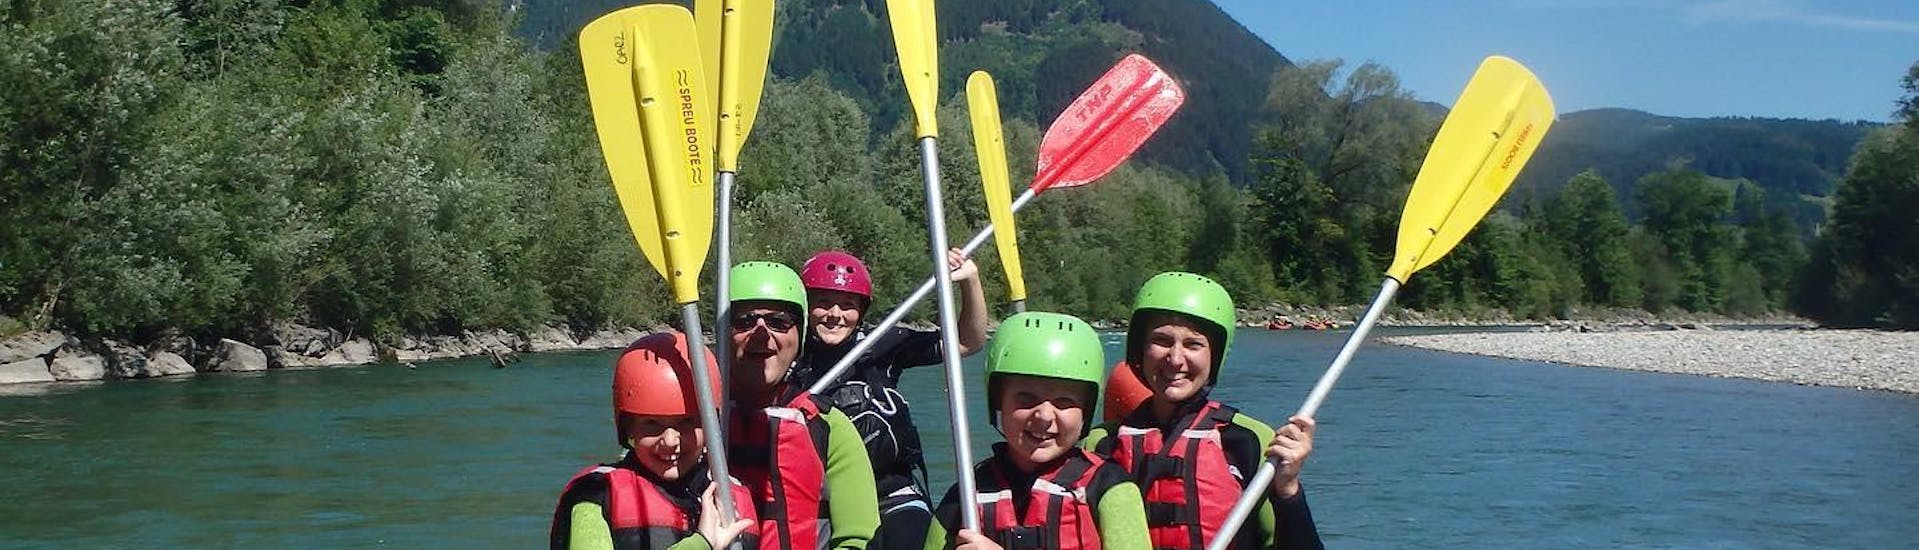 A group in a boat during Rafting on the Iller Rivier in Blaichach for Kids & Families with Outdoorzentrum Allgäu.